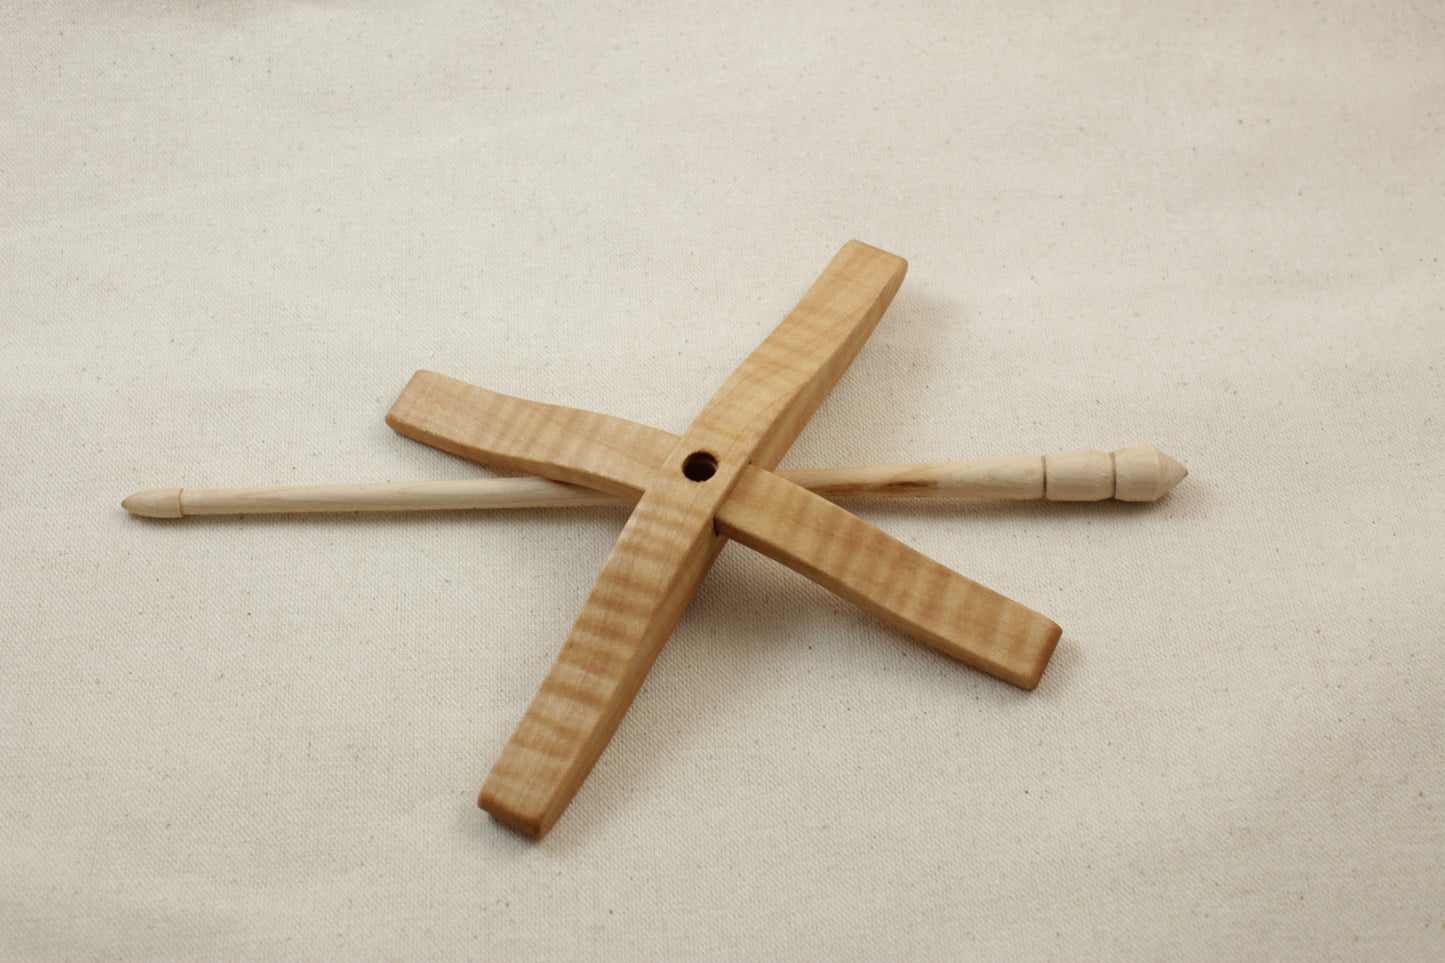 05.03.01 Tiger Maple Full Size Glider Turkish Drop Spindle